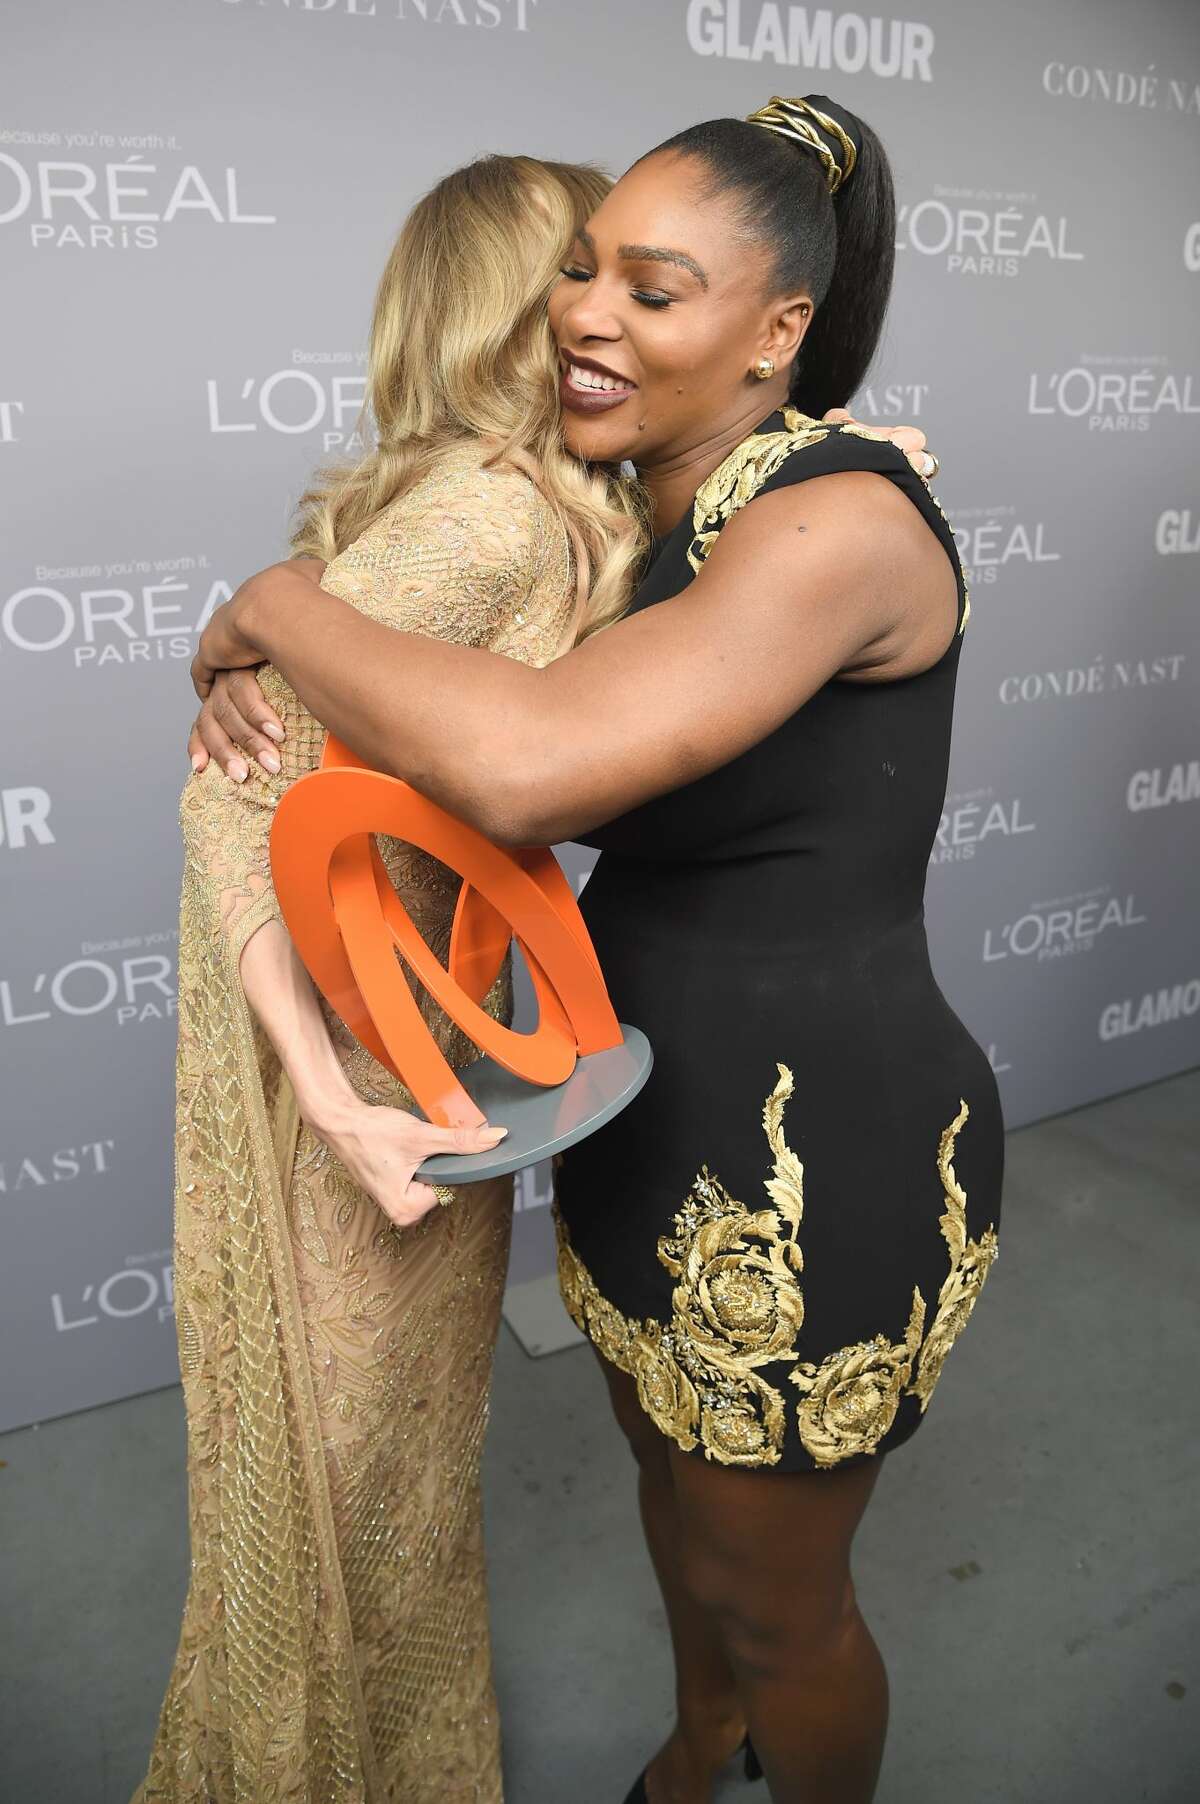 Gigi Hadid and Serena Williams hug backstage at Glamour's 2017 Women of The Year Awards at Kings Theatre on November 13, 2017 in Brooklyn, New York. (Photo by Dimitrios Kambouris/Getty Images for Glamour)